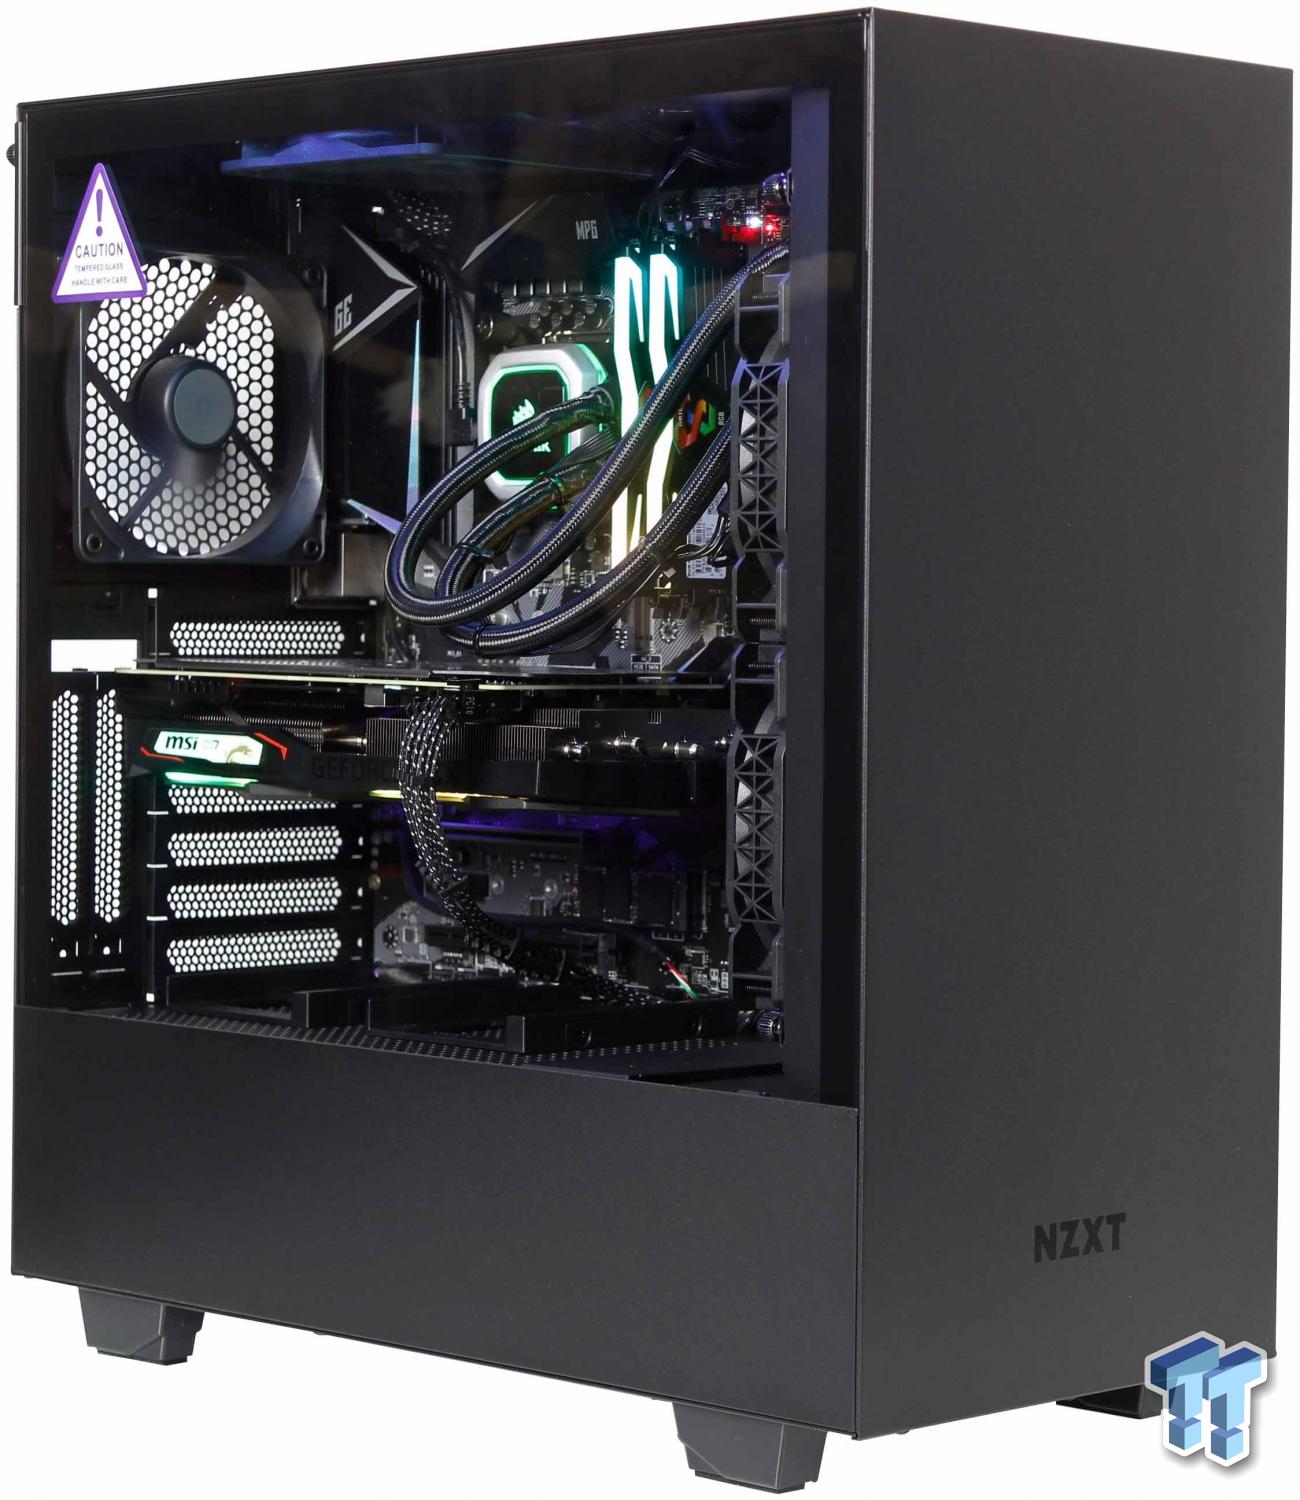 Nzxt H500i Mid Tower Chassis Review Tweaktown